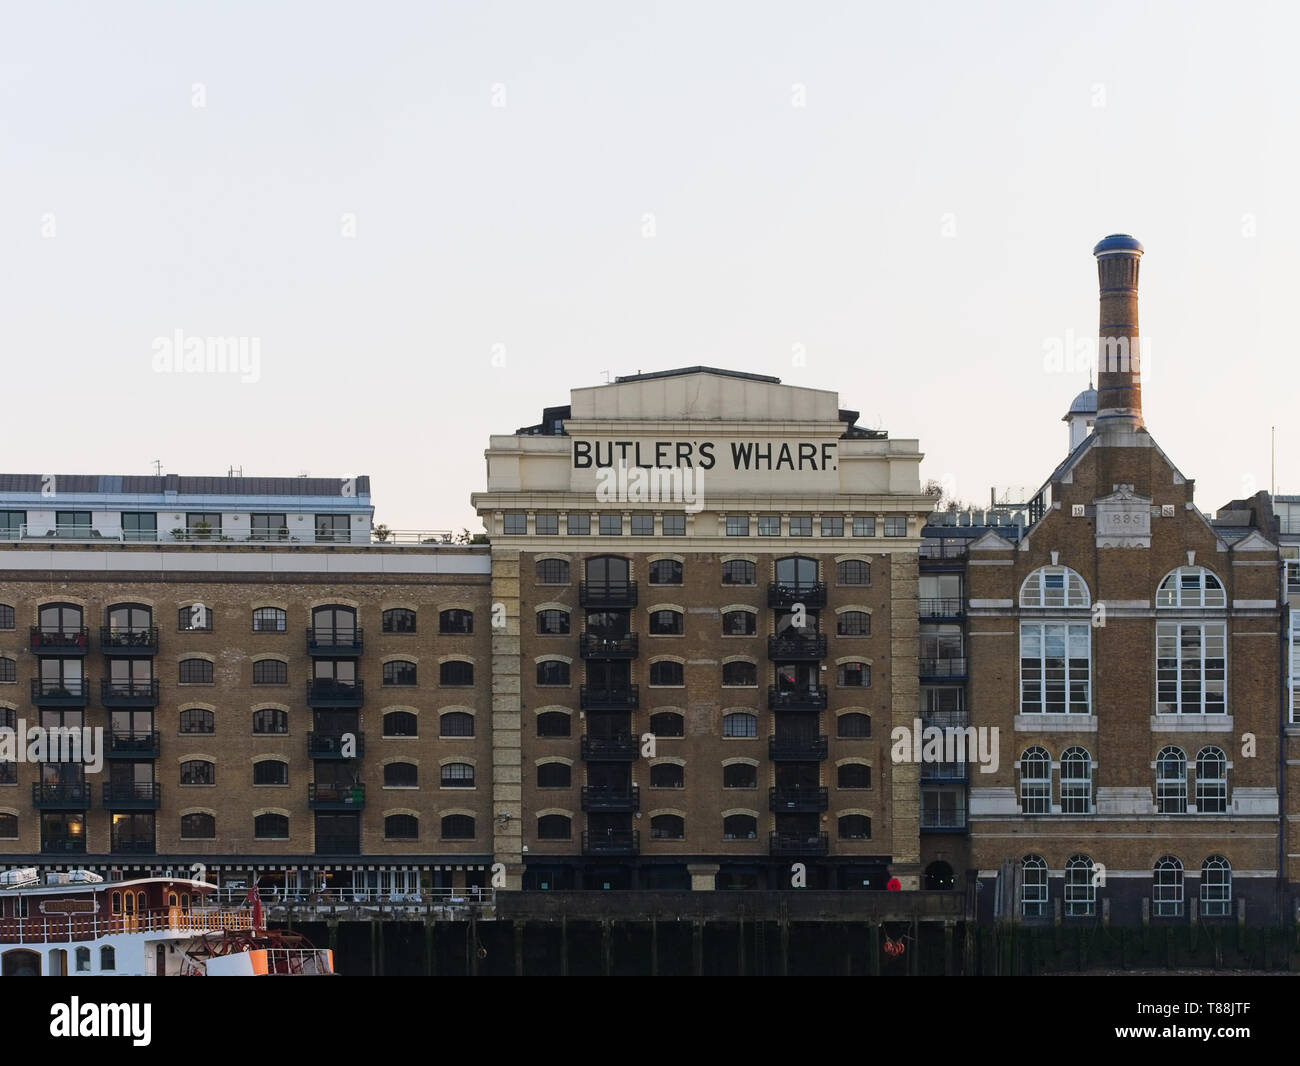 Historic Butler's Wharf building on the south bank of the River Thames at dusk, London, UK. Stock Photo